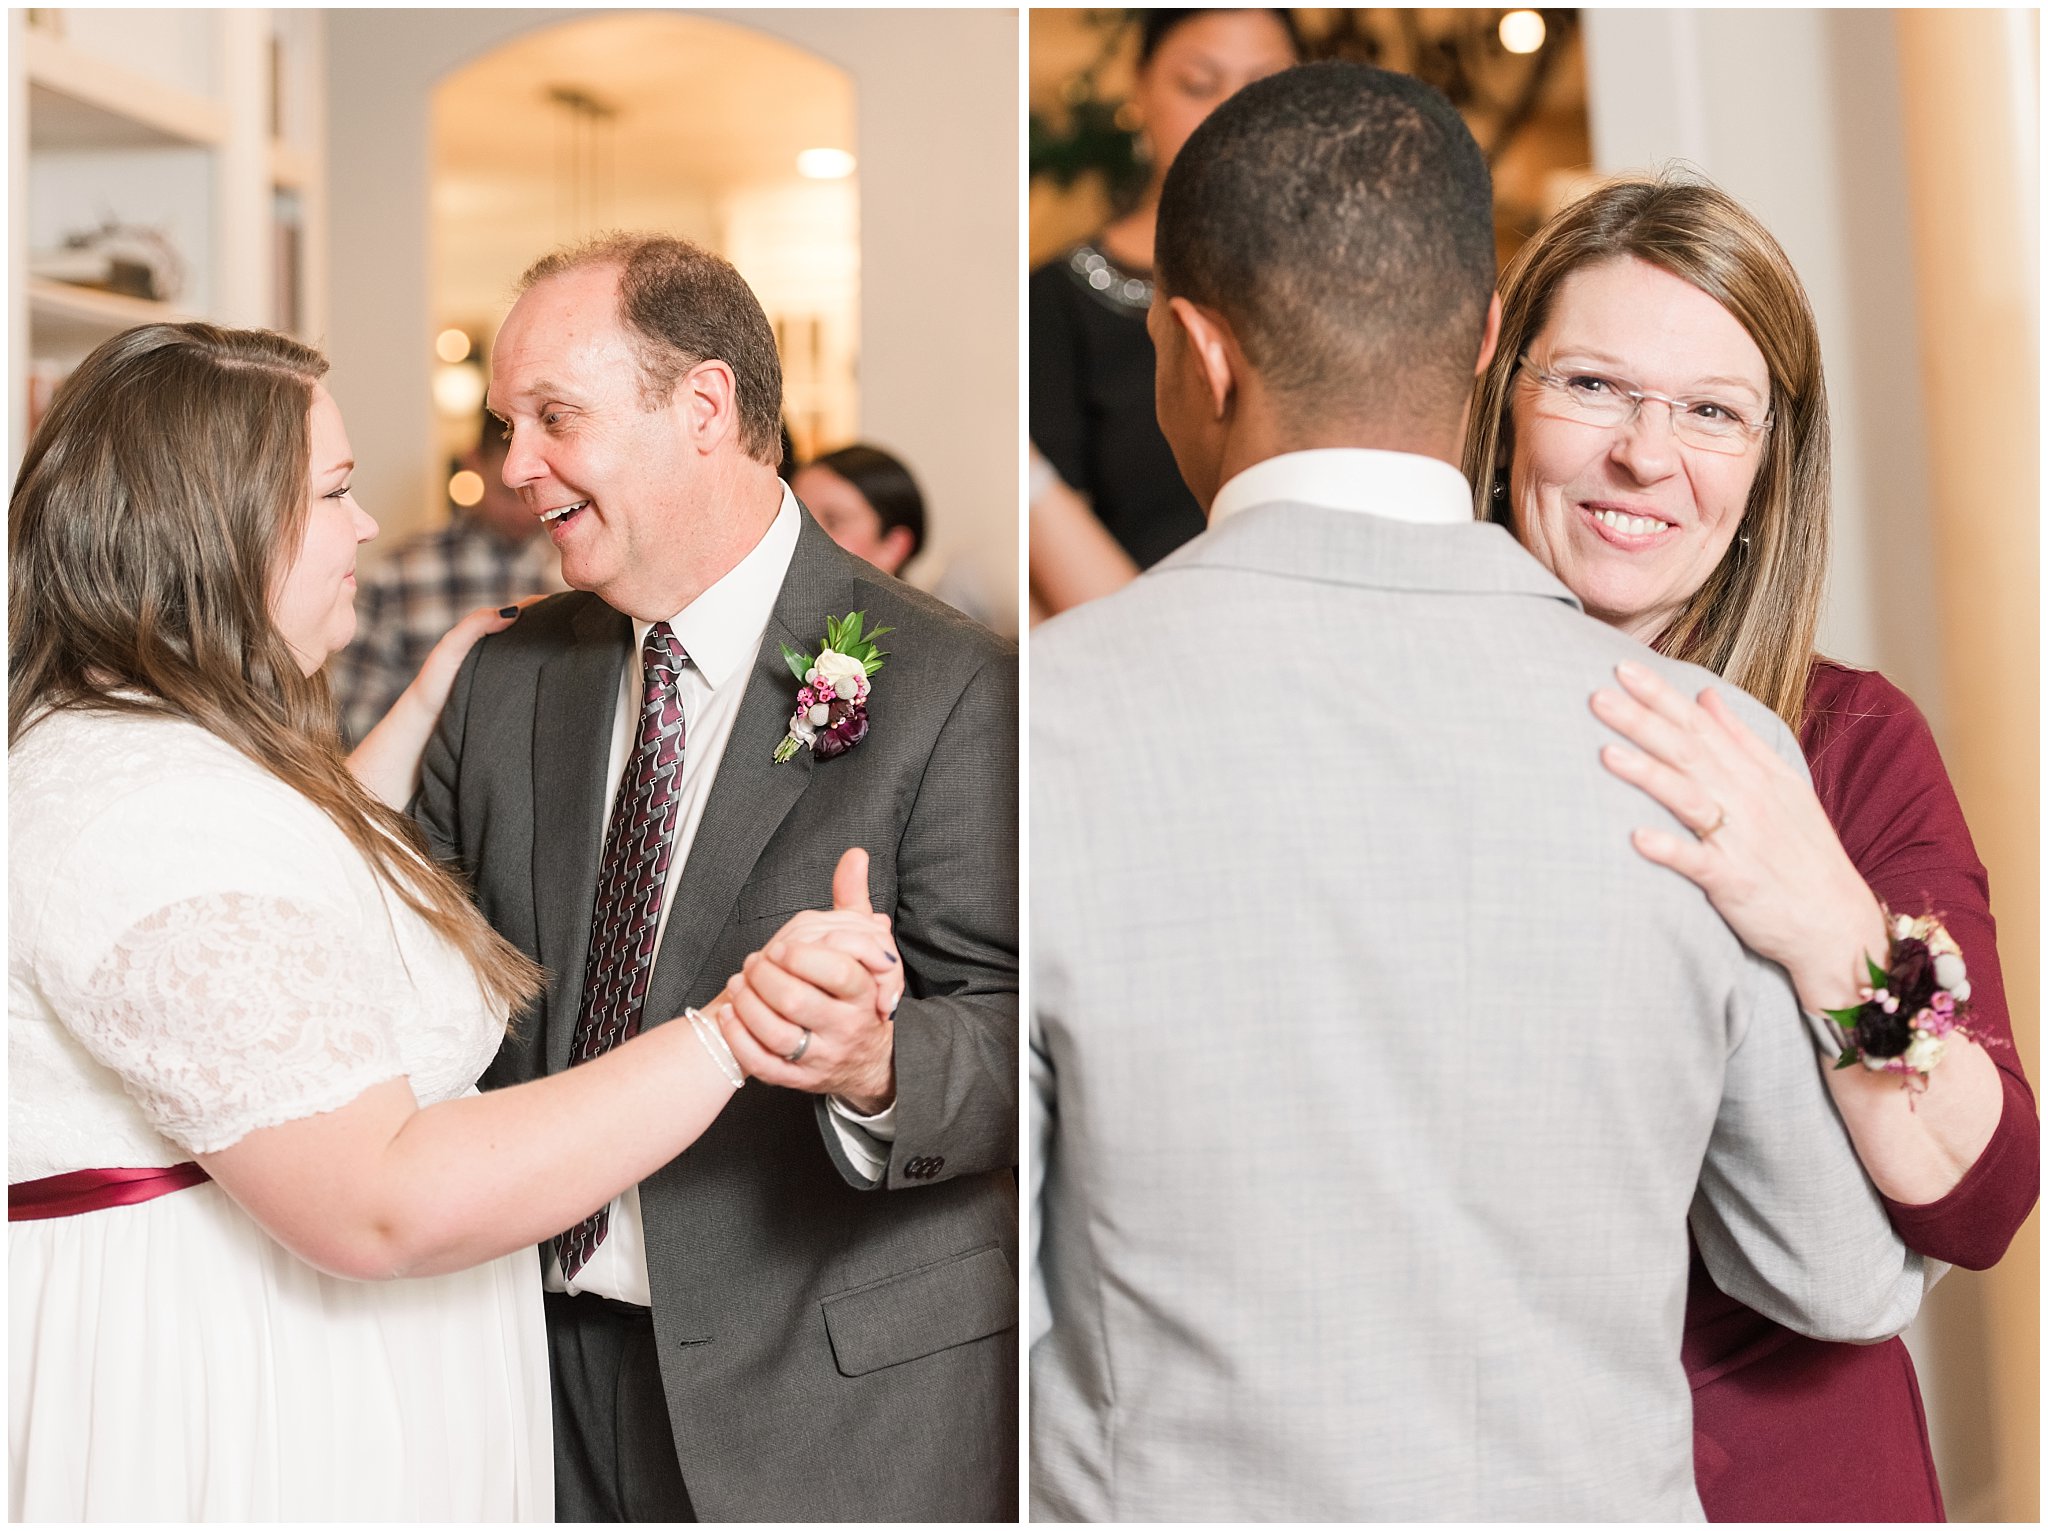 Bride and groom dancing with parents at in home reception | Jordan River Temple Winter wedding and reception | Jessie and Dallin Photography